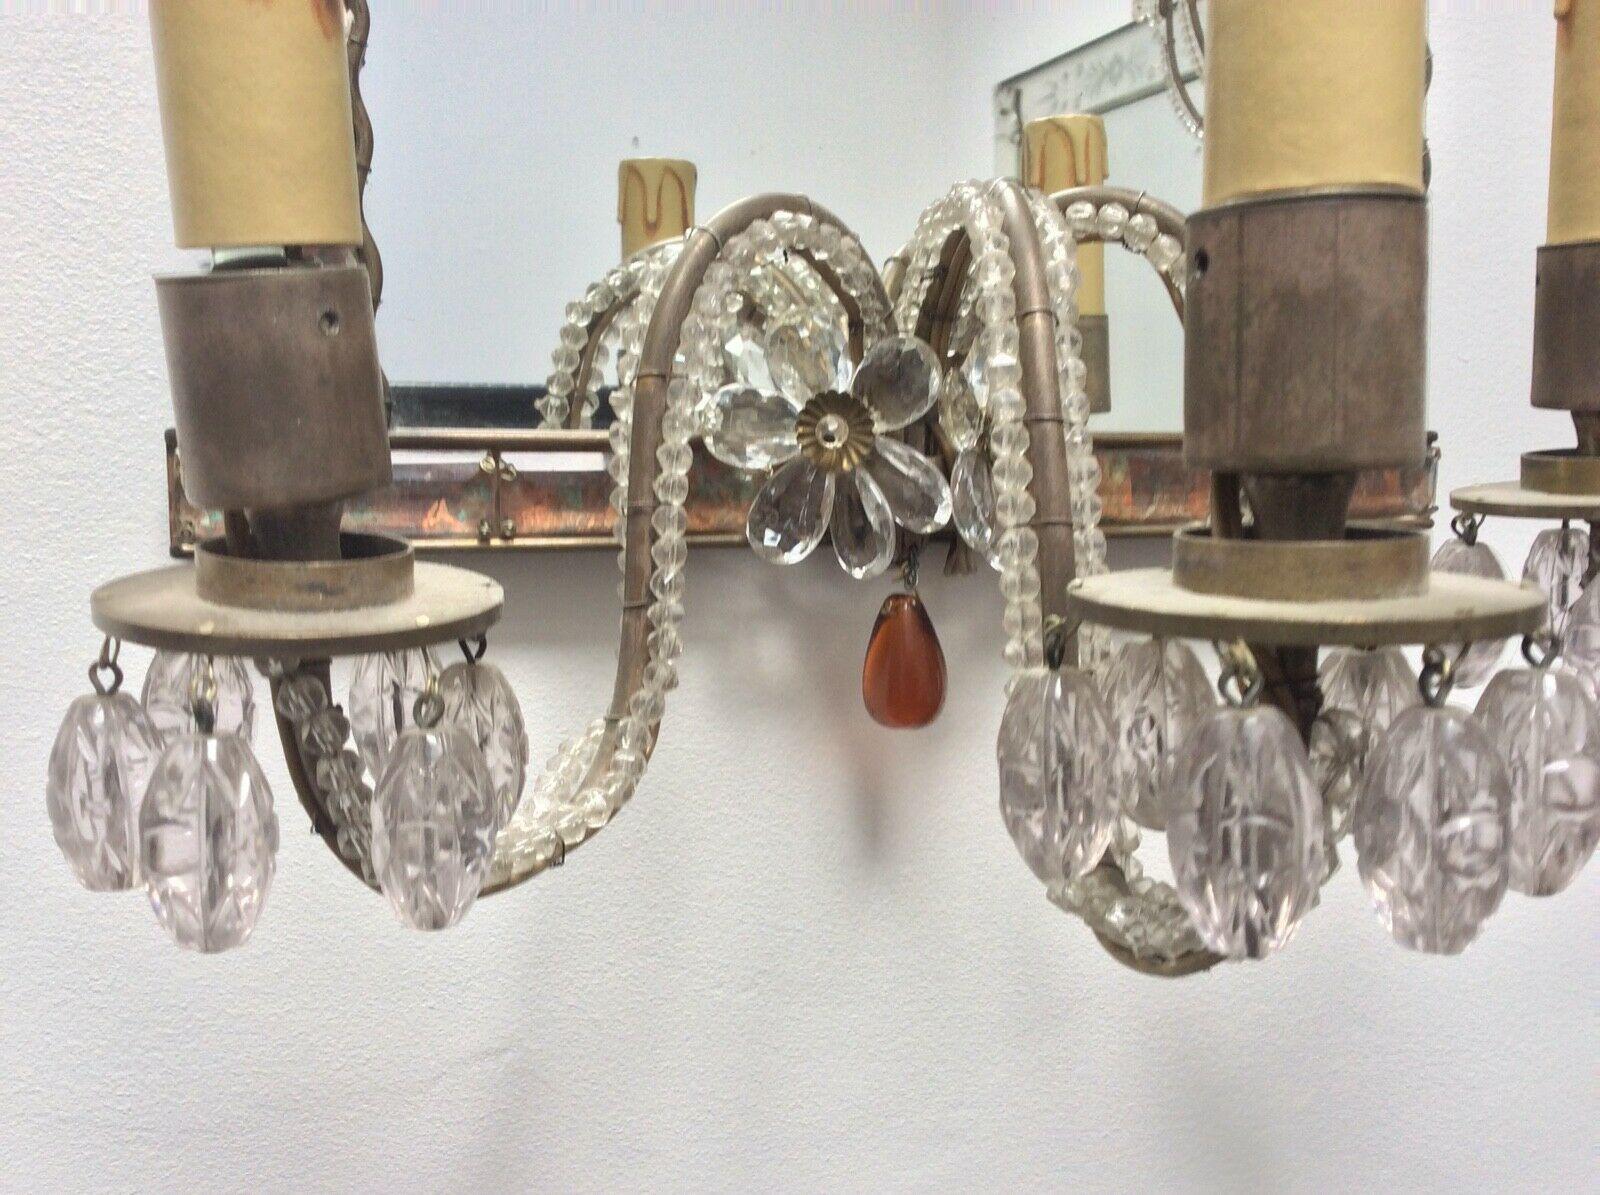 Early 20th Century Rare 1920s French Art Deco Crystal Maison Bagues Wall Mirror Sconce / Wall Lamp For Sale